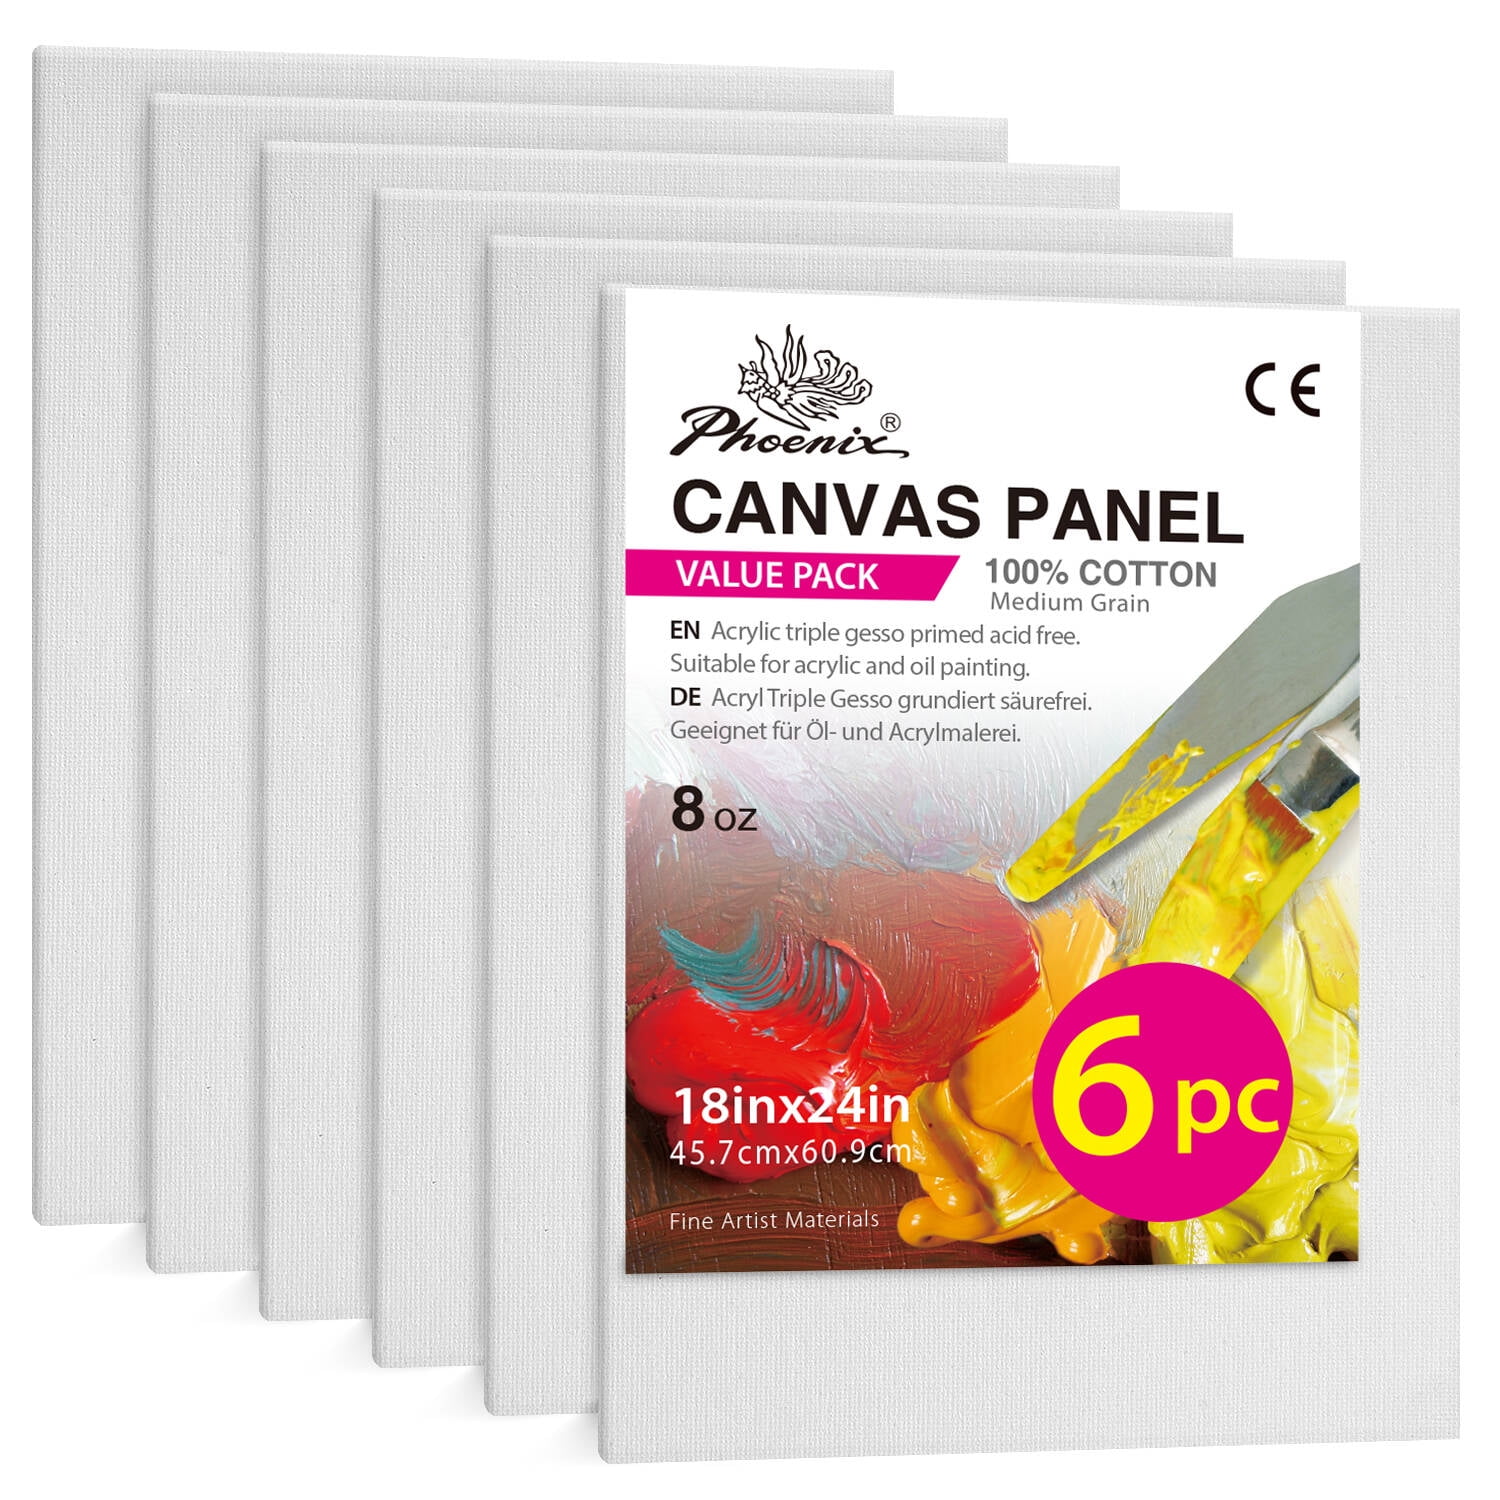  Artkey Mini Canvas, 4x4 inch 24-Pack Small Canvases for  Painting, 100% Cotton 2/5 Inch Profile Square Canvas Painting Canvas for  Acrylics Oil Watercolor Painting & Signs Crafts